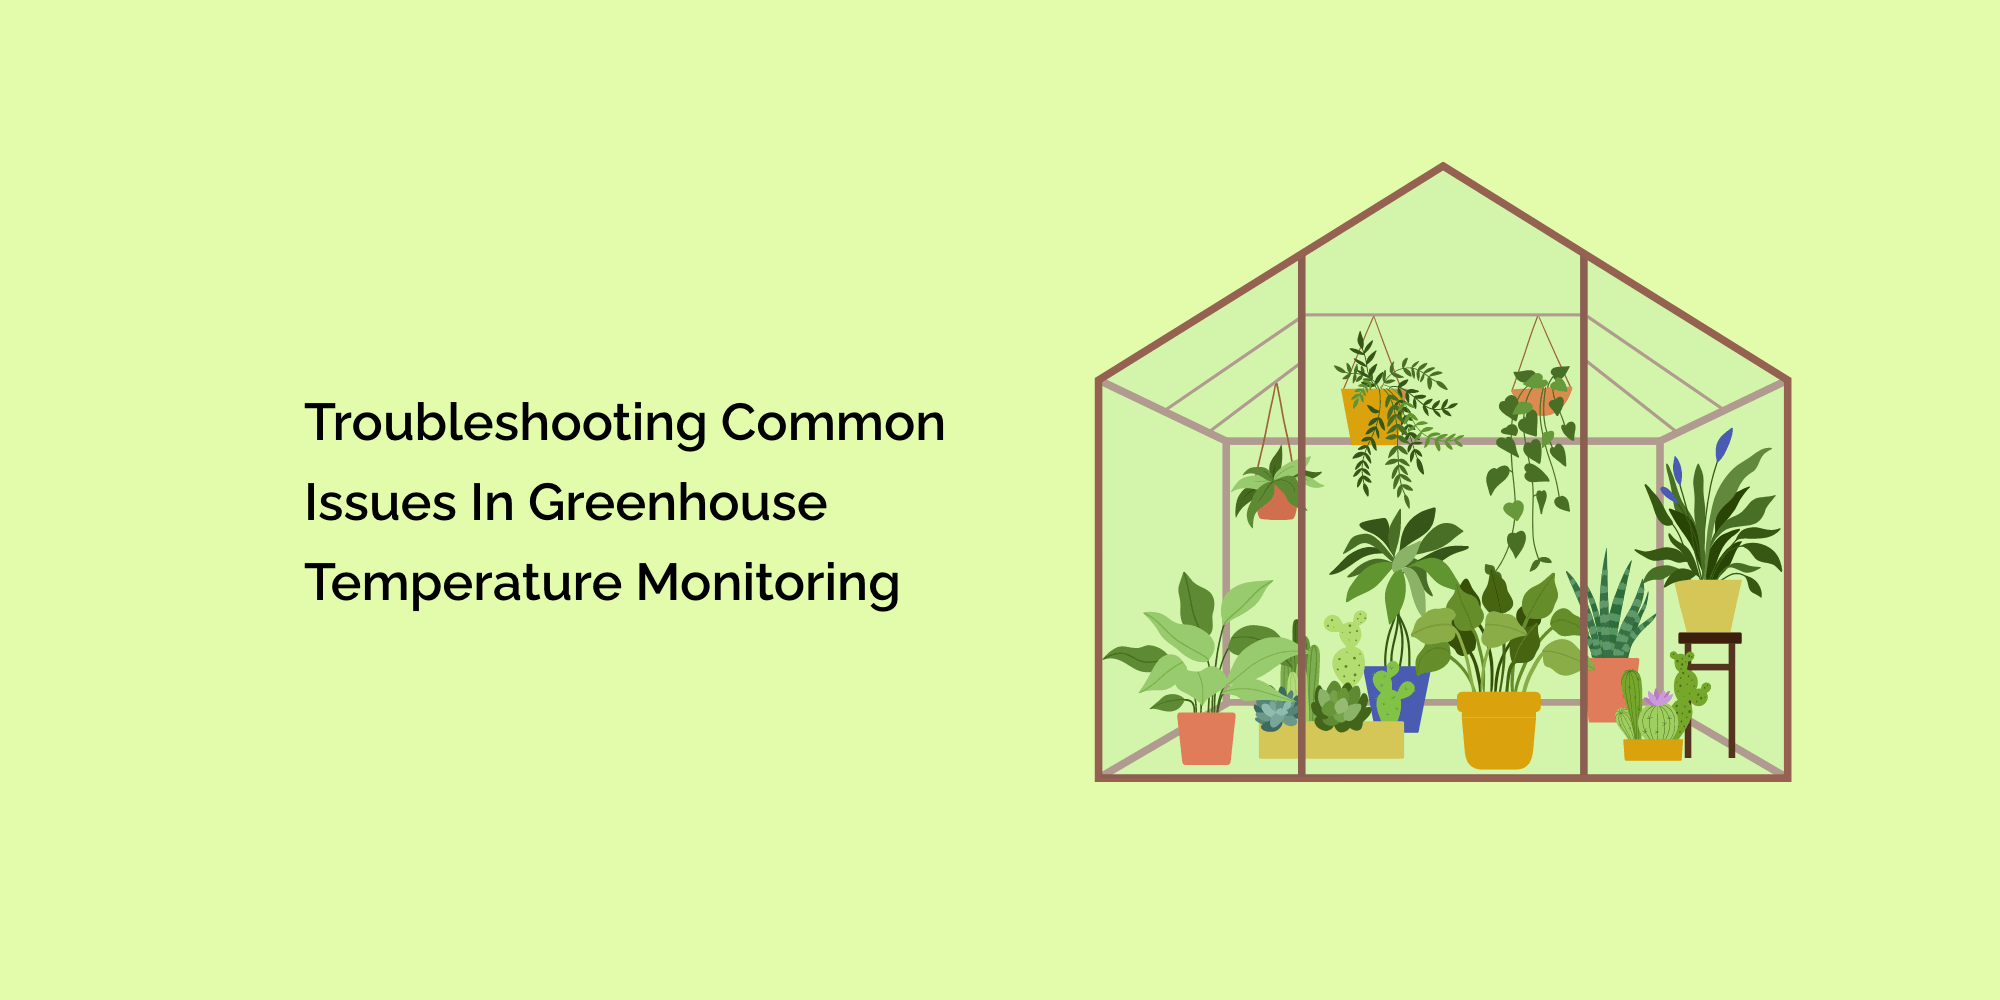 Troubleshooting Common Issues in Greenhouse Temperature Monitoring